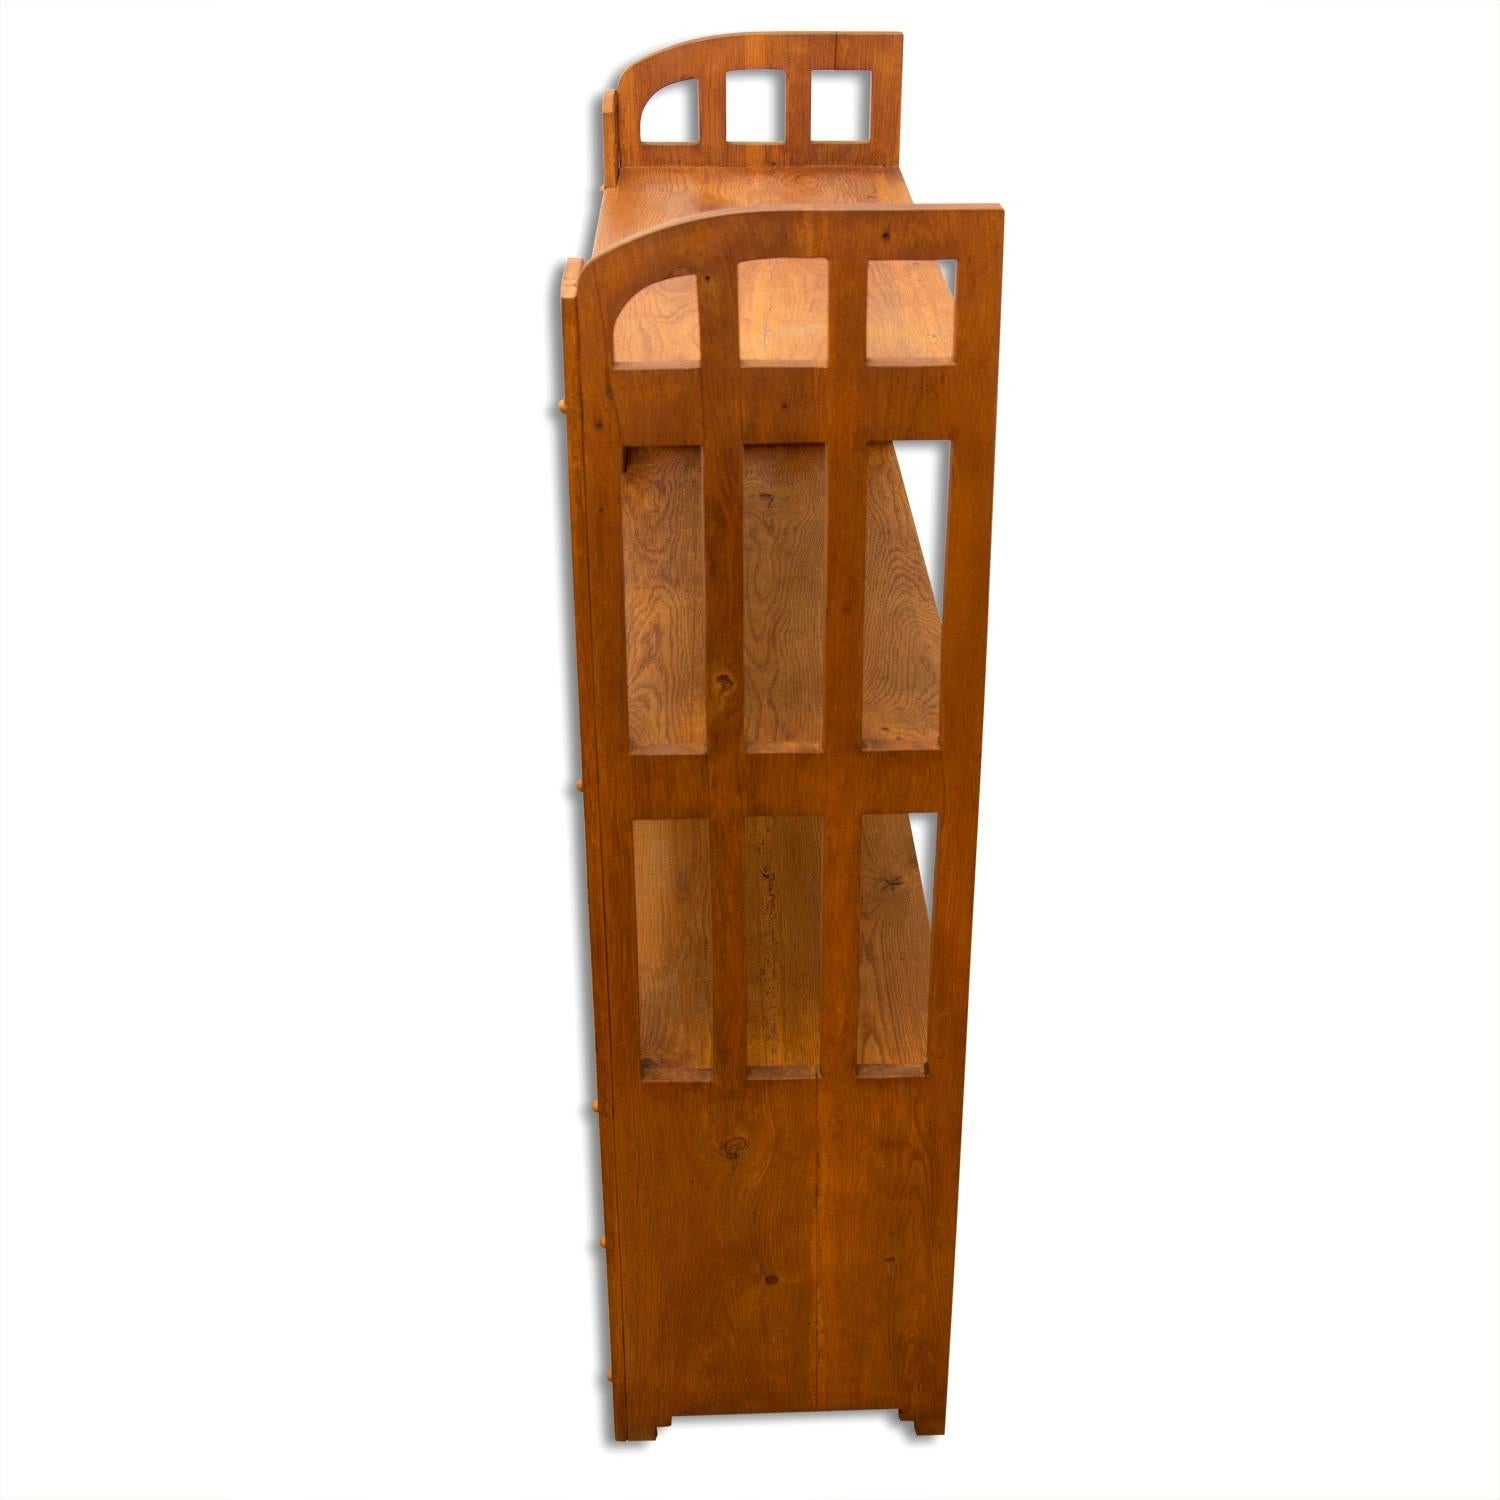 Early 20th Century Viennese Secession Etagere, circa 1910, Austria-Hungary